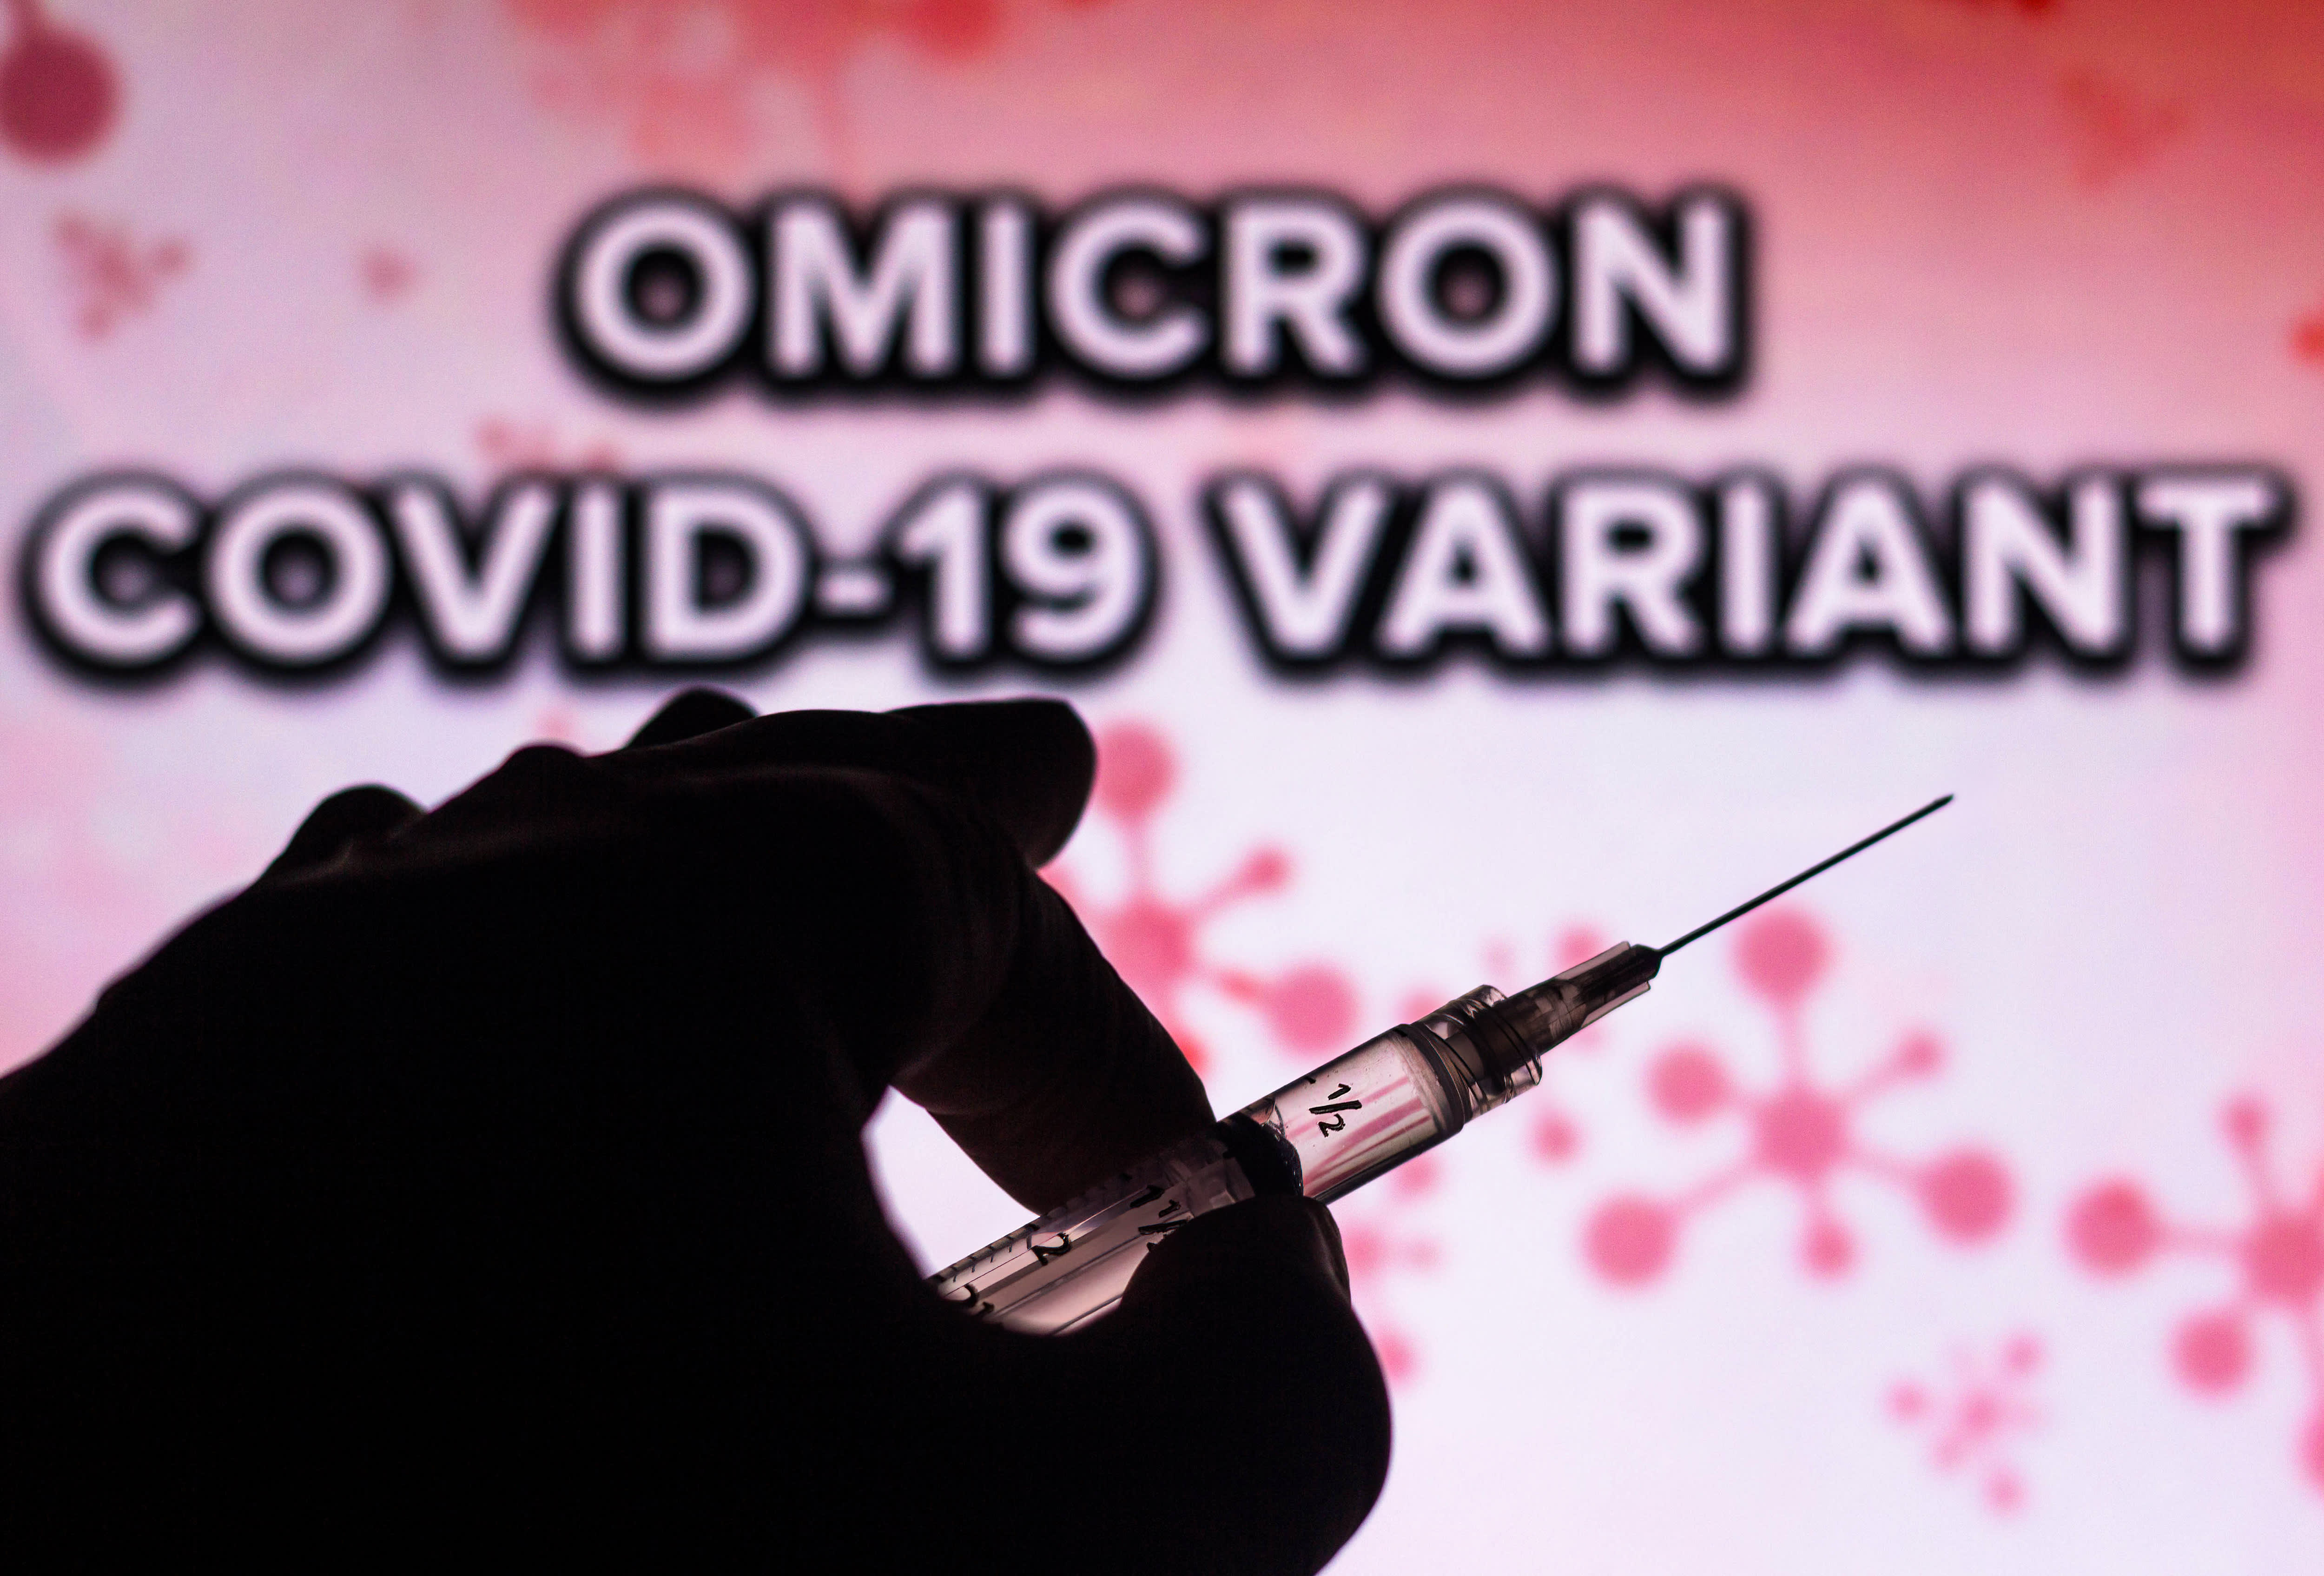 Fauci says omicron Covid variant has already been found in 20 countries, but not..